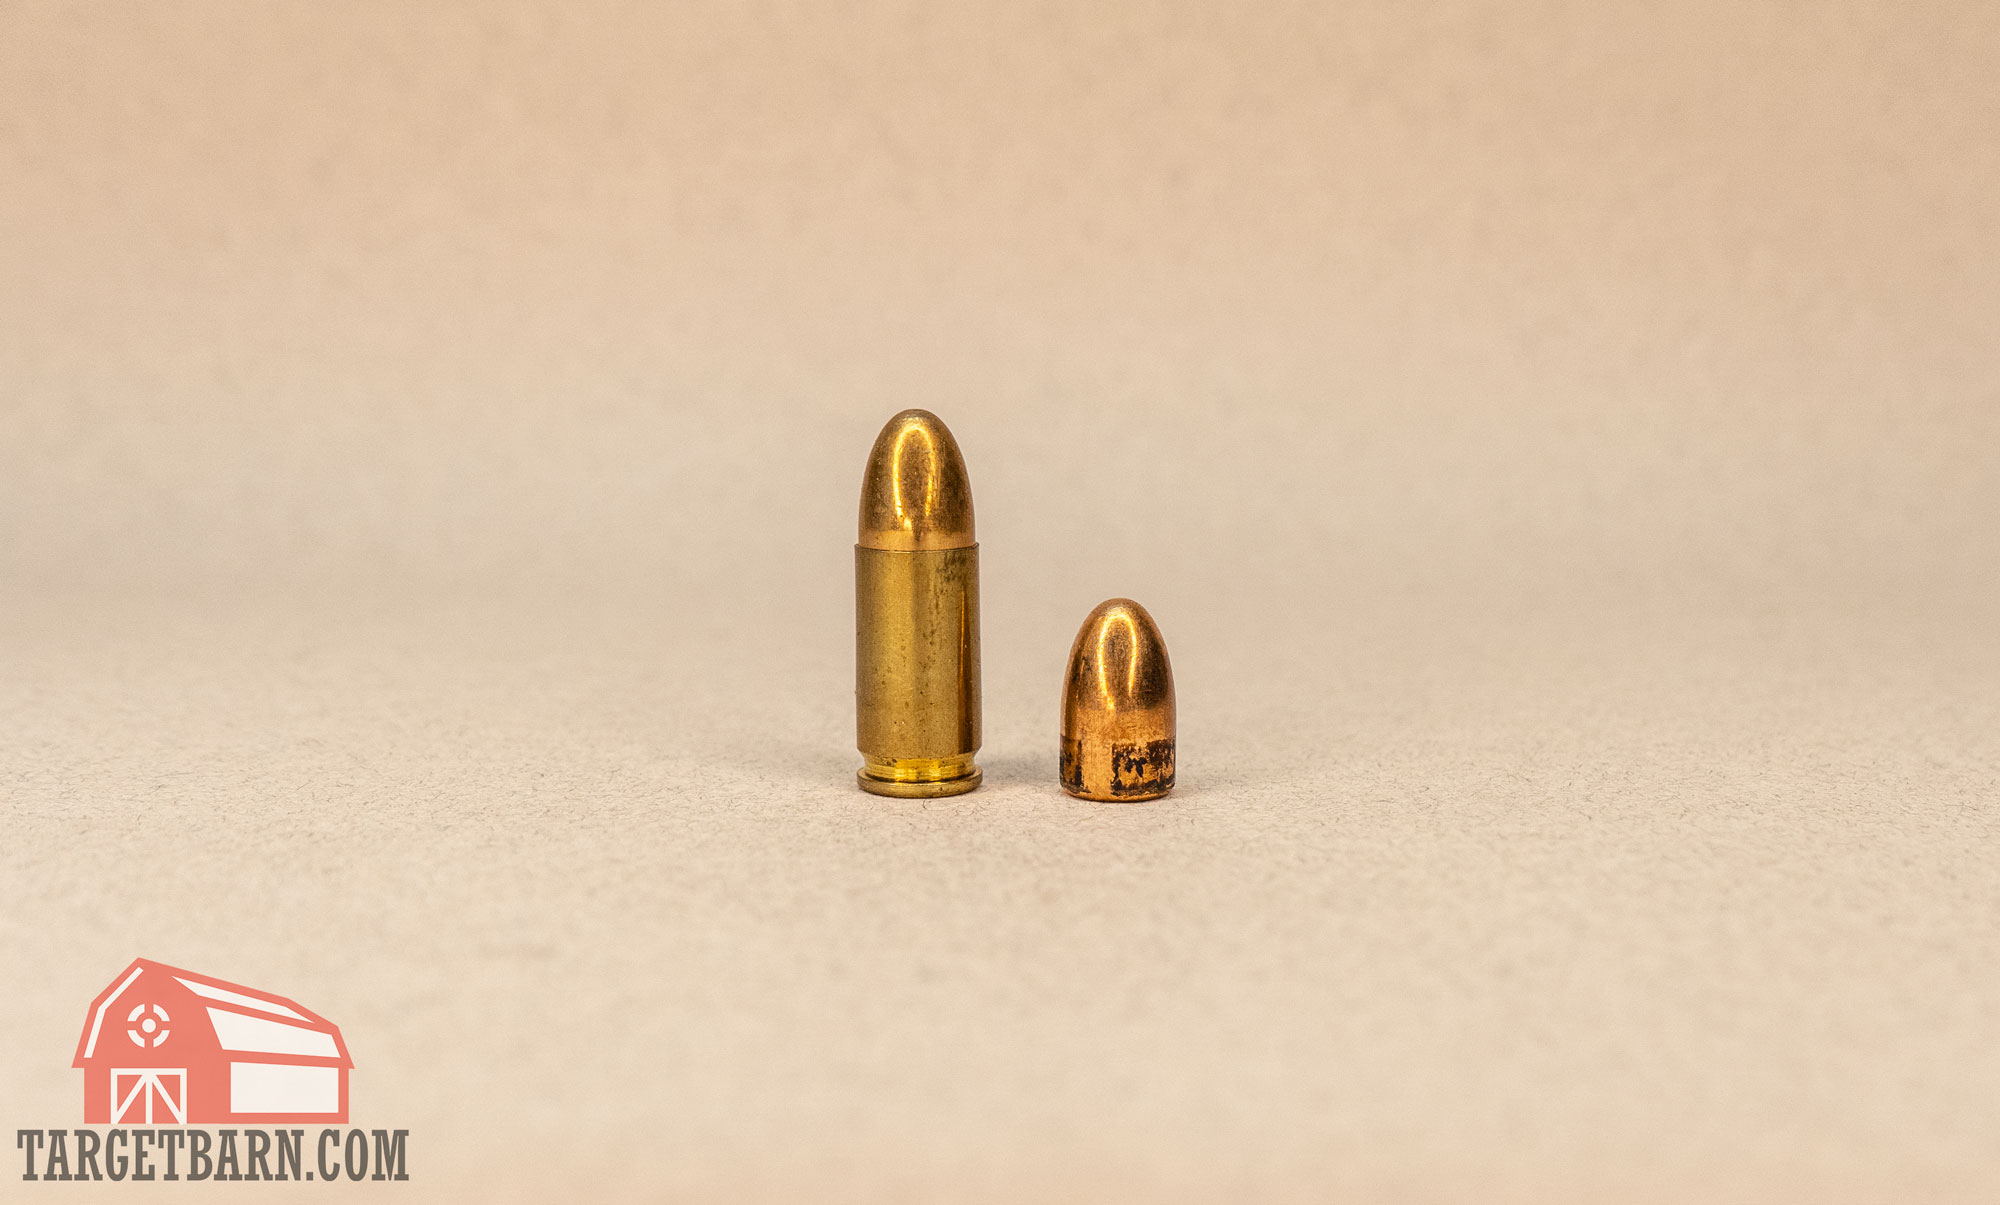 a 9mm cartridge next to a 9mm bullet